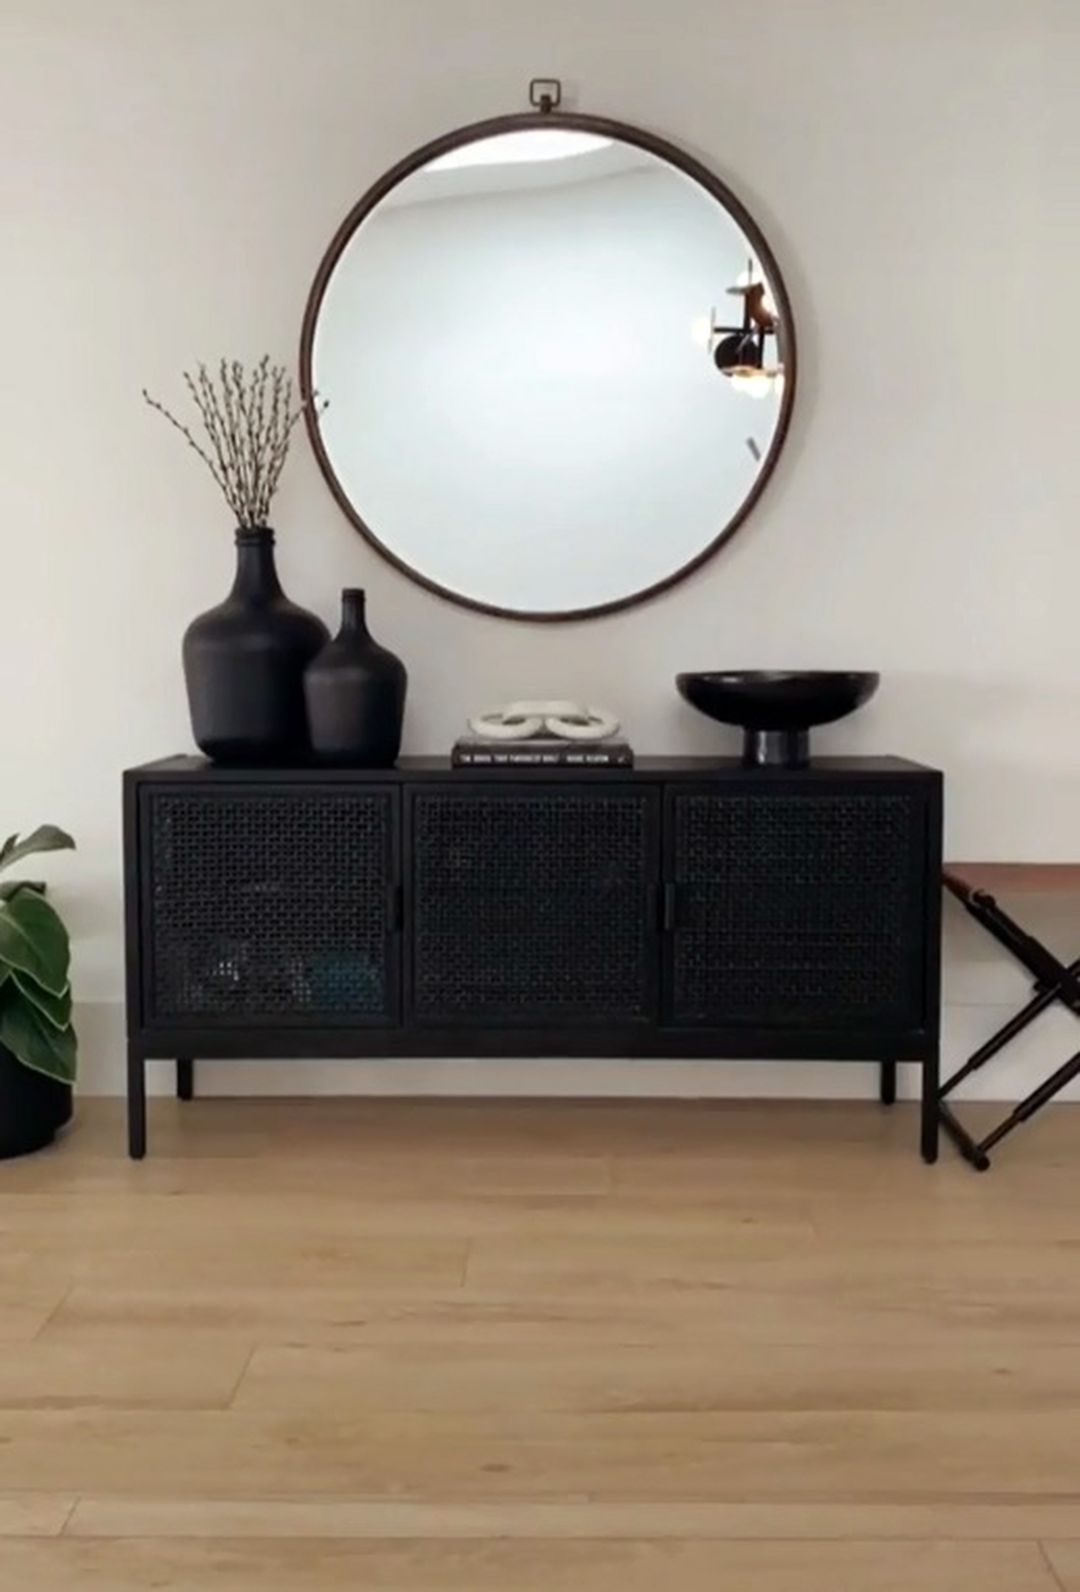 All Black Decoration On Console Table